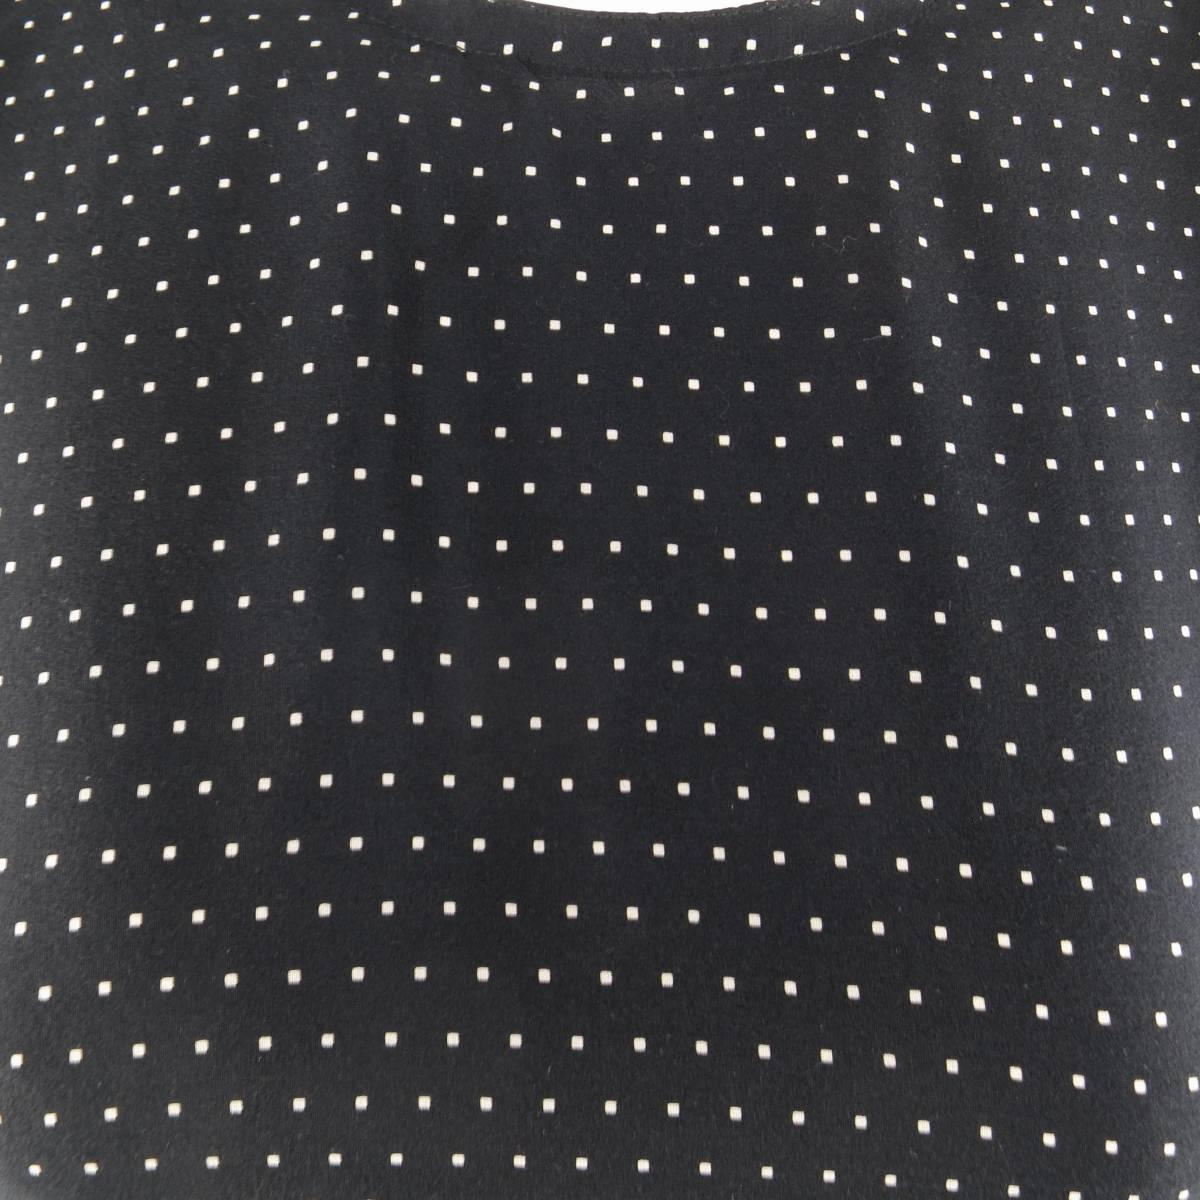 Vintage 1980's GIANNI VERSACE sleeveless blouse in a light weight black silk with cream square polka dot patter and crew neckline. Made in Italy.
 
Excellent Pre-Owned Condition.
Marked: IT 42
 
Measurements:
 
Shoulder: 14.5 in.
Bust: 38